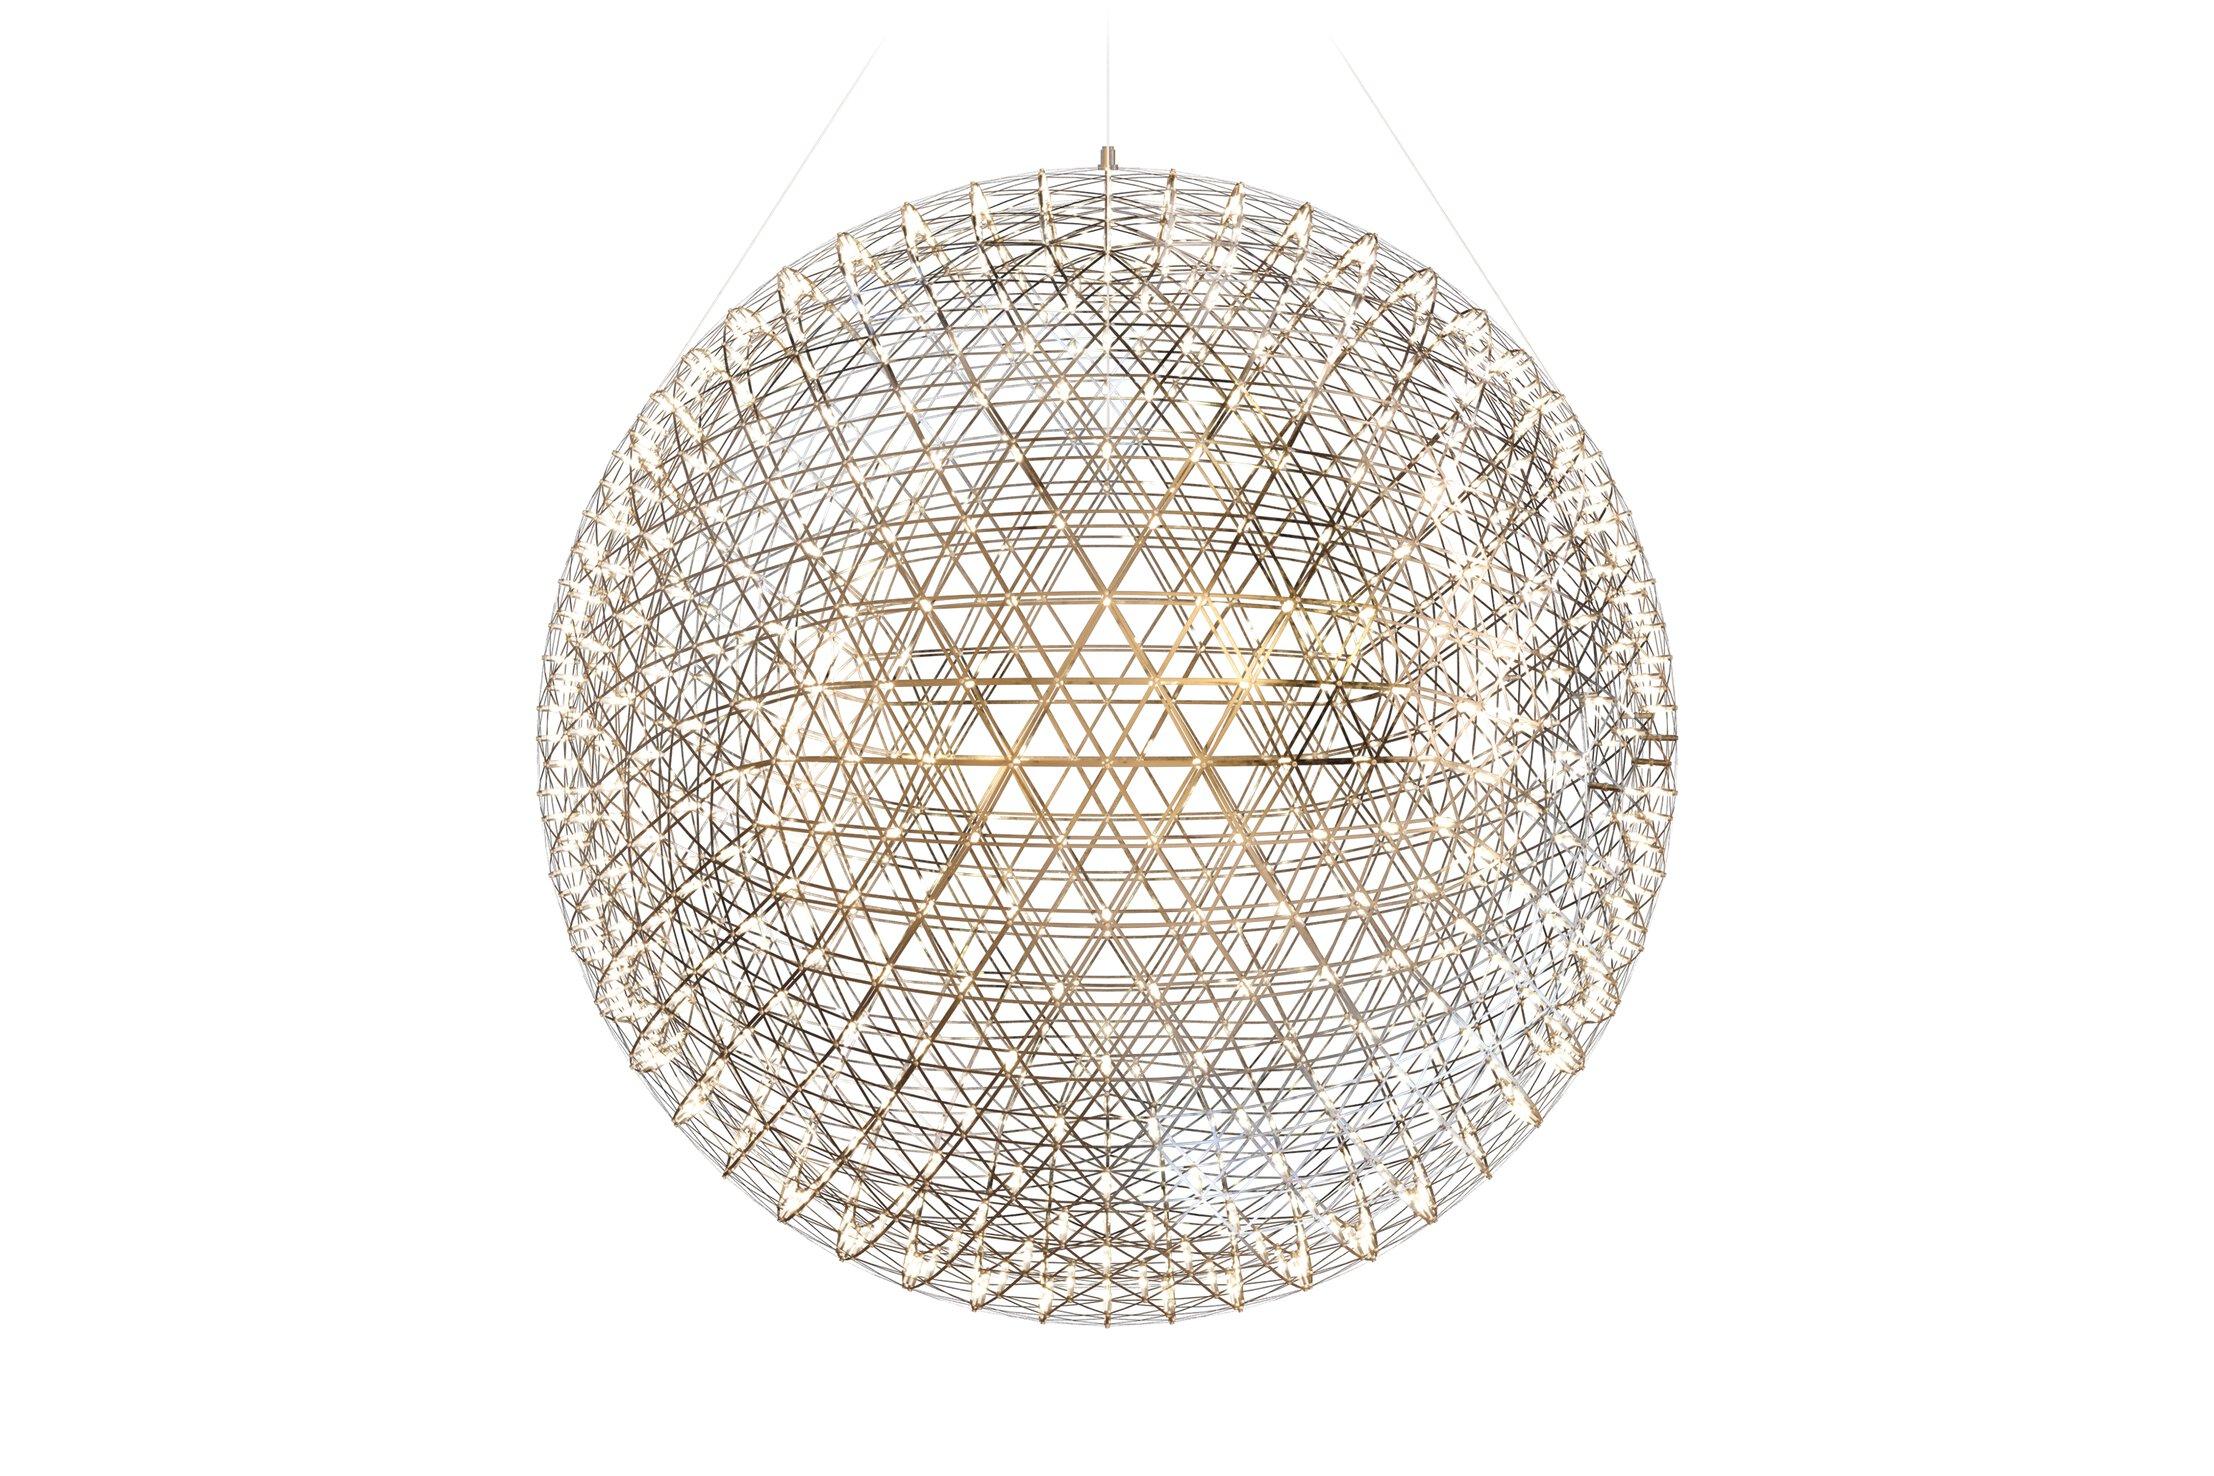 The Raimond lights: perfect spheres of mathematical ingredients punctuated by tiny LED lights. Designer Raimond Puts was intrigued by the shape of the geodesic dome and with the mystery of prime numbers. It’s no coincidence that the dimension of all